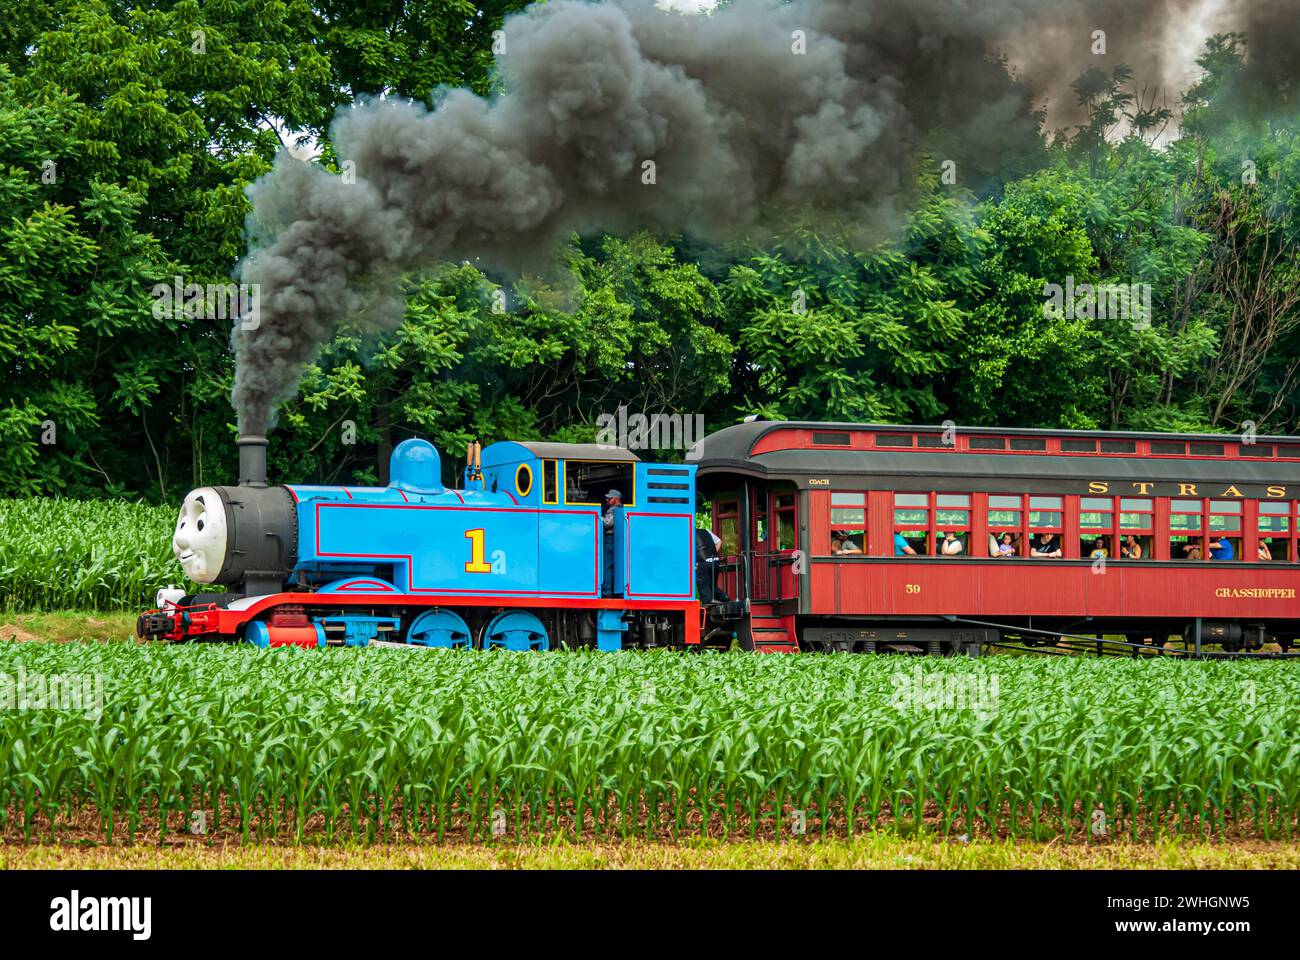 View of Thomas the Train Pulling Passenger Cars Blowing Smoke and Steam Stock Photo